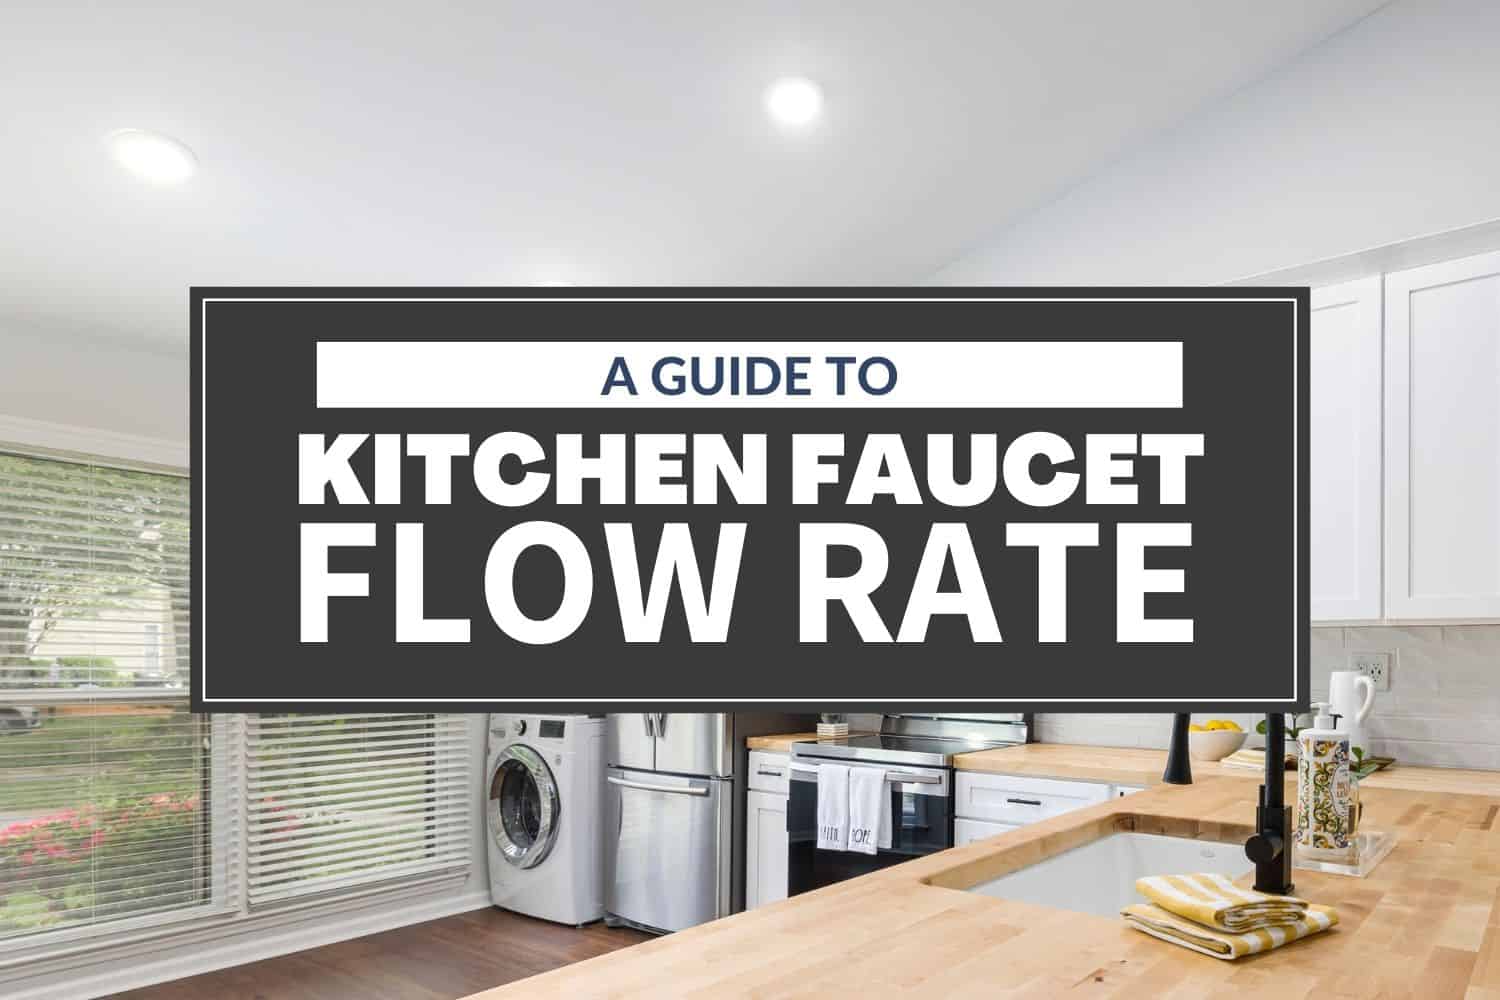 A guide to kitchen faucet flow rate